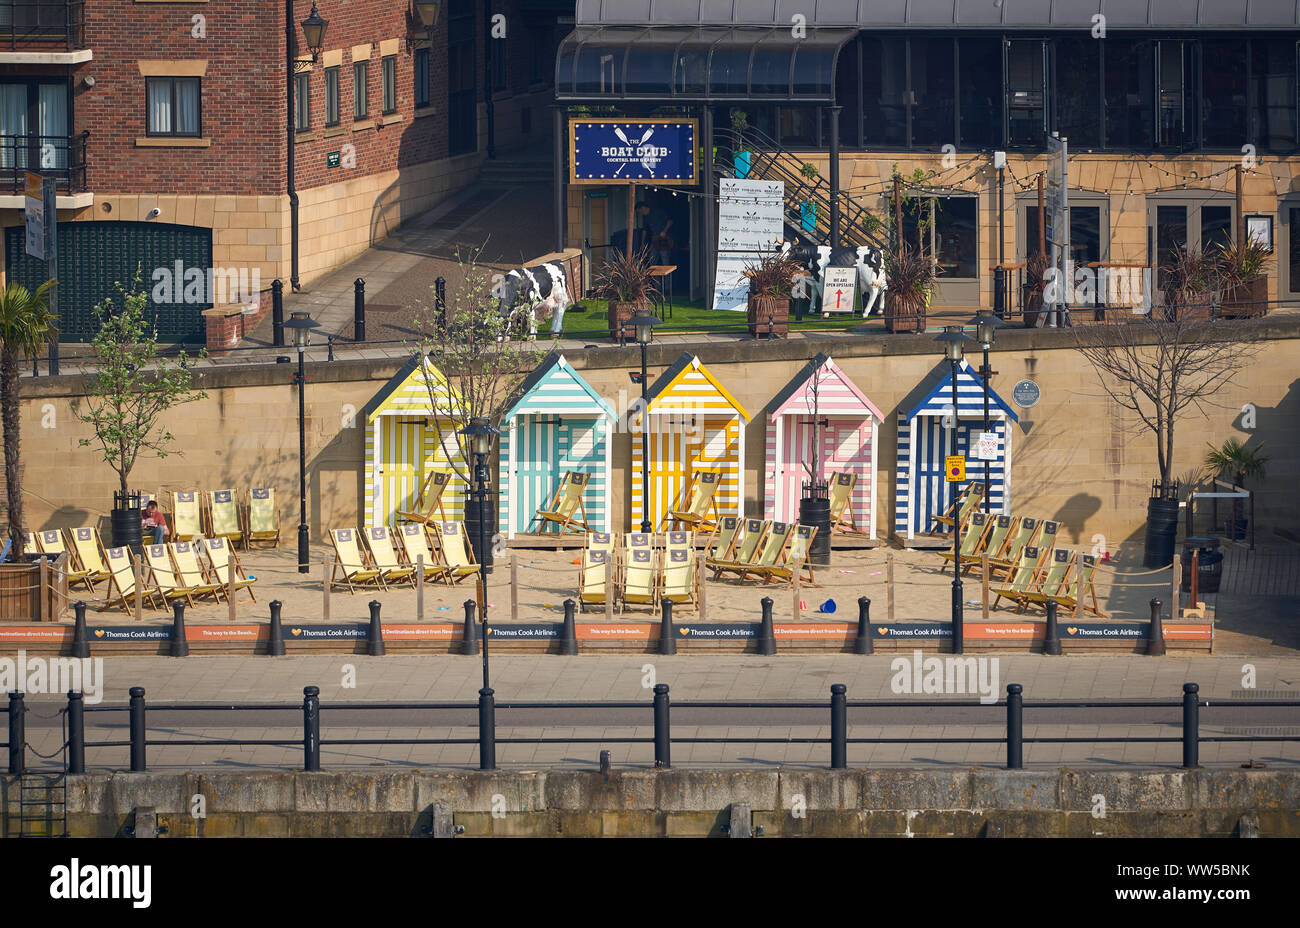 NEWCASTLE UPON TYNE, ENGLAND, UK - MAY 08, 2018: Thomas Cook's manmade Seaside with sand beach, deckchairs and colourful beach huts Stock Photo